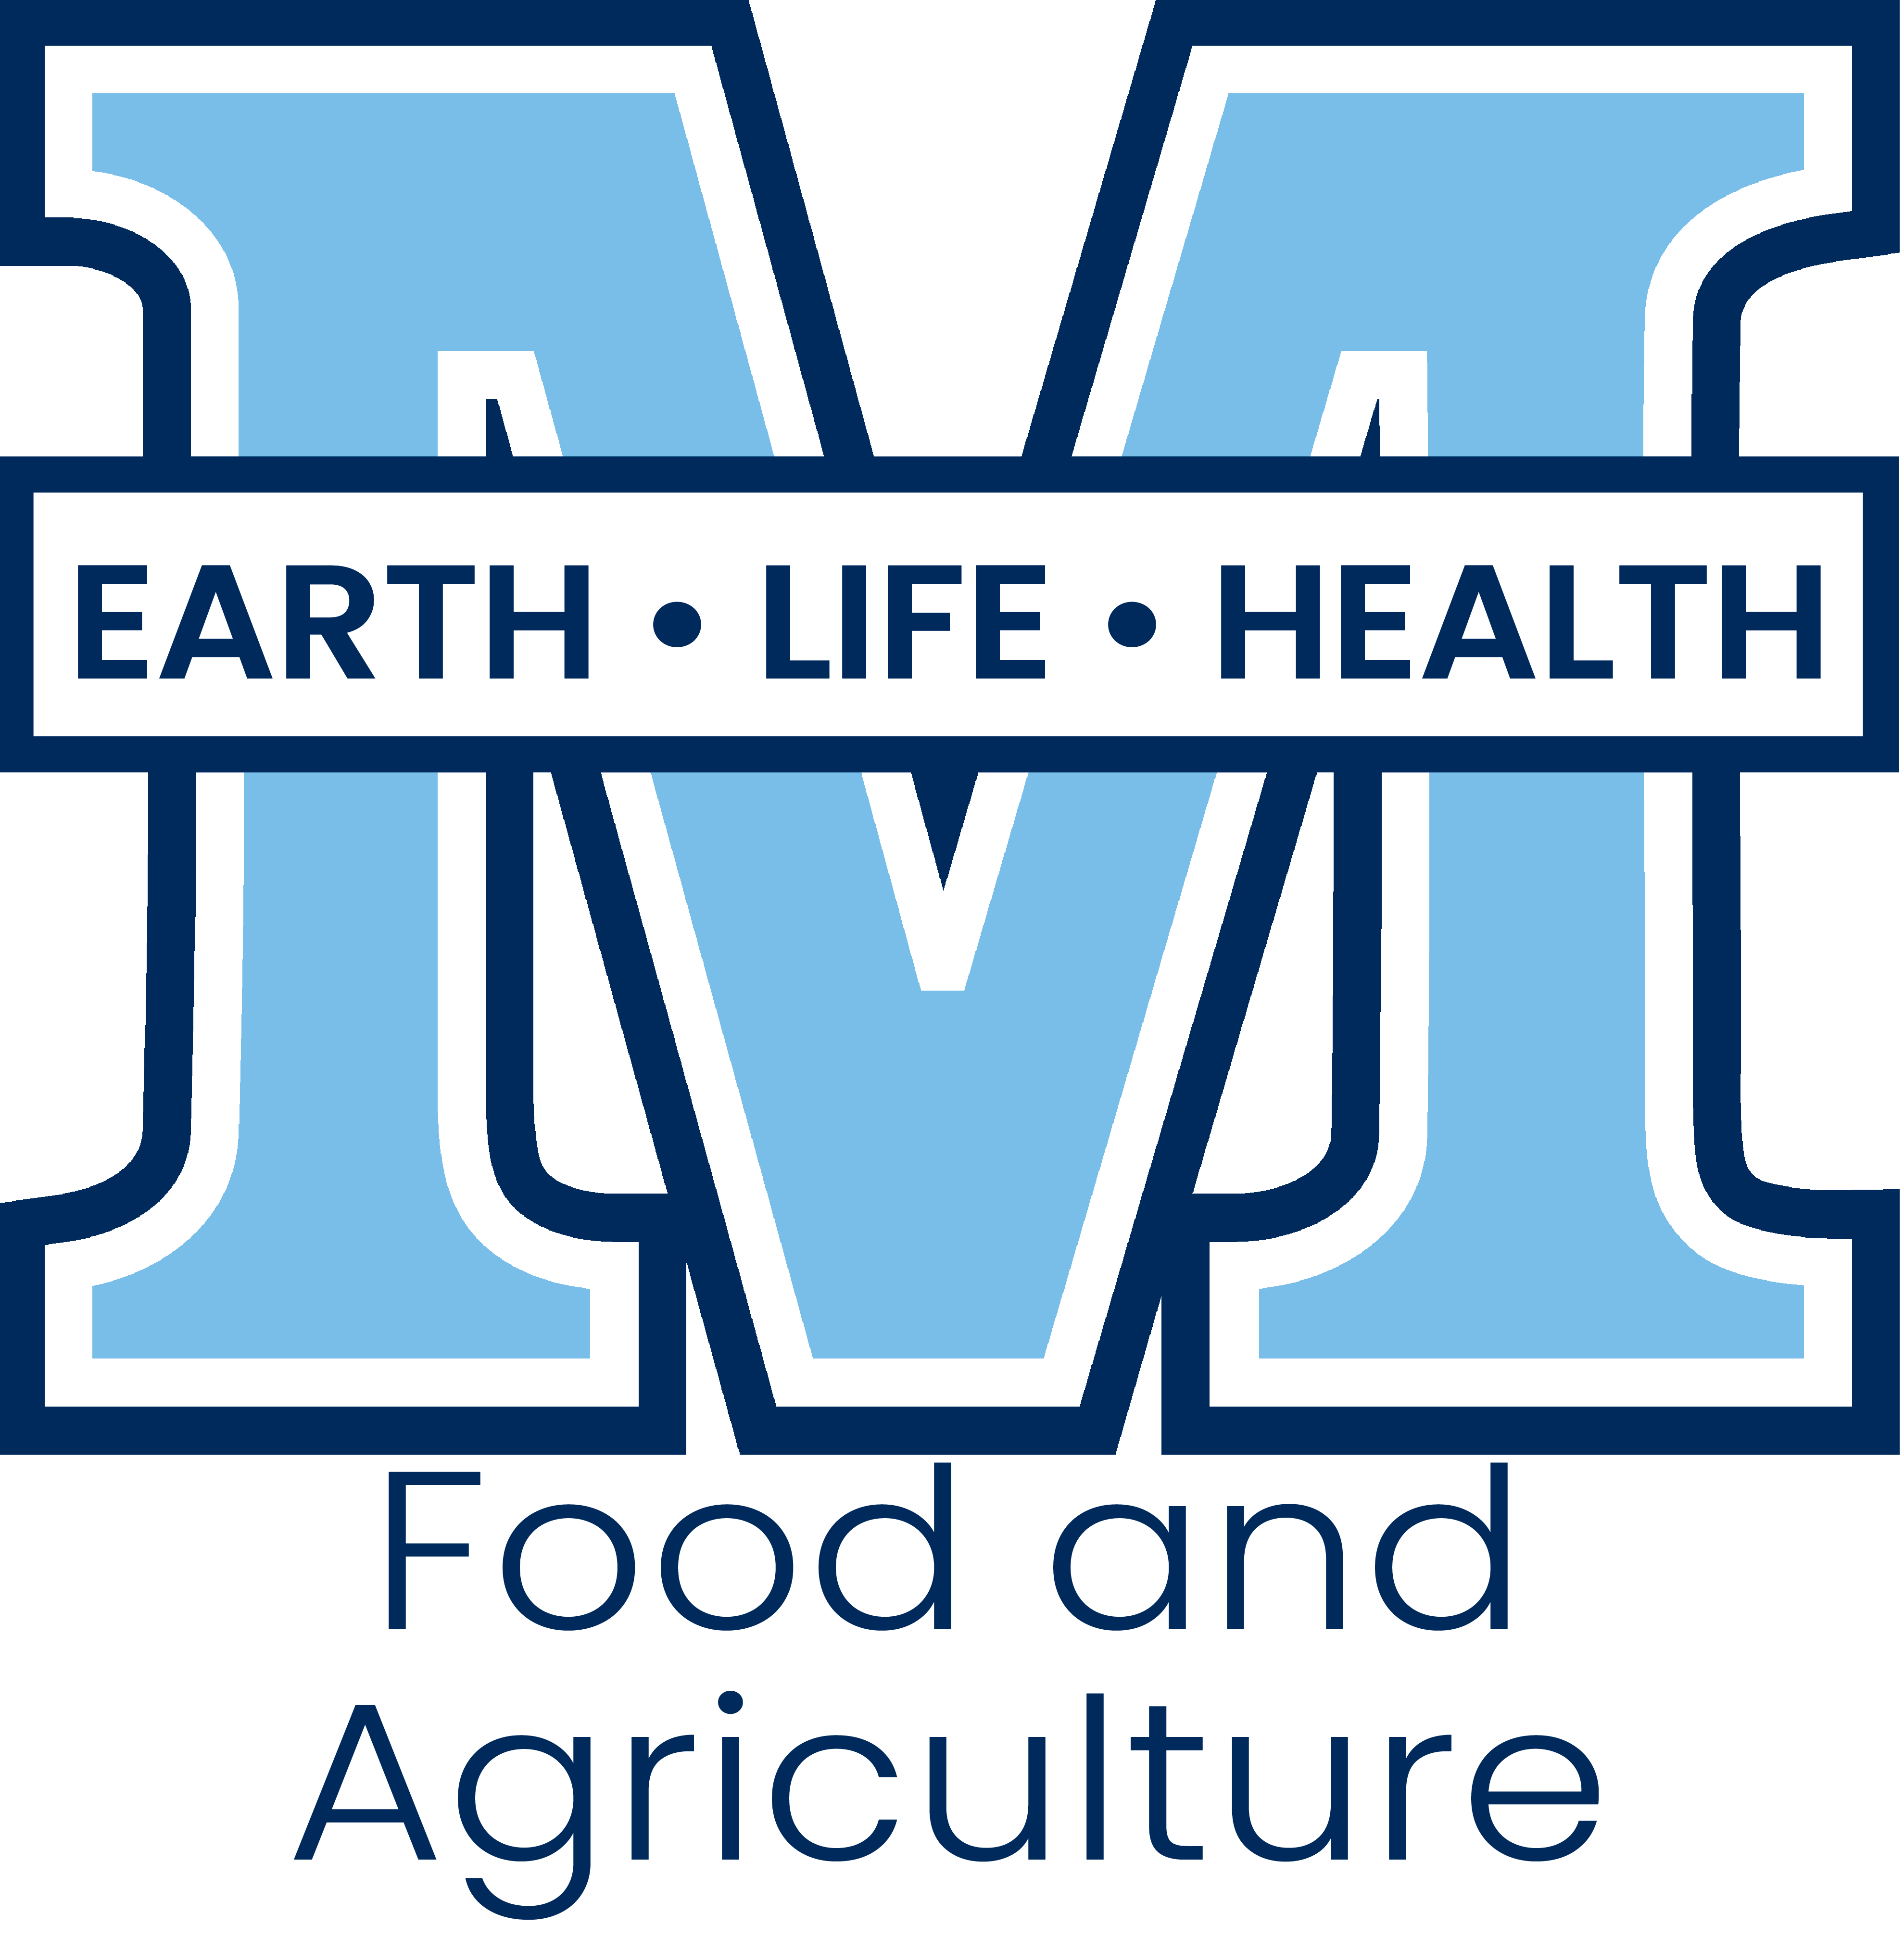 College M logo with food and agriculture